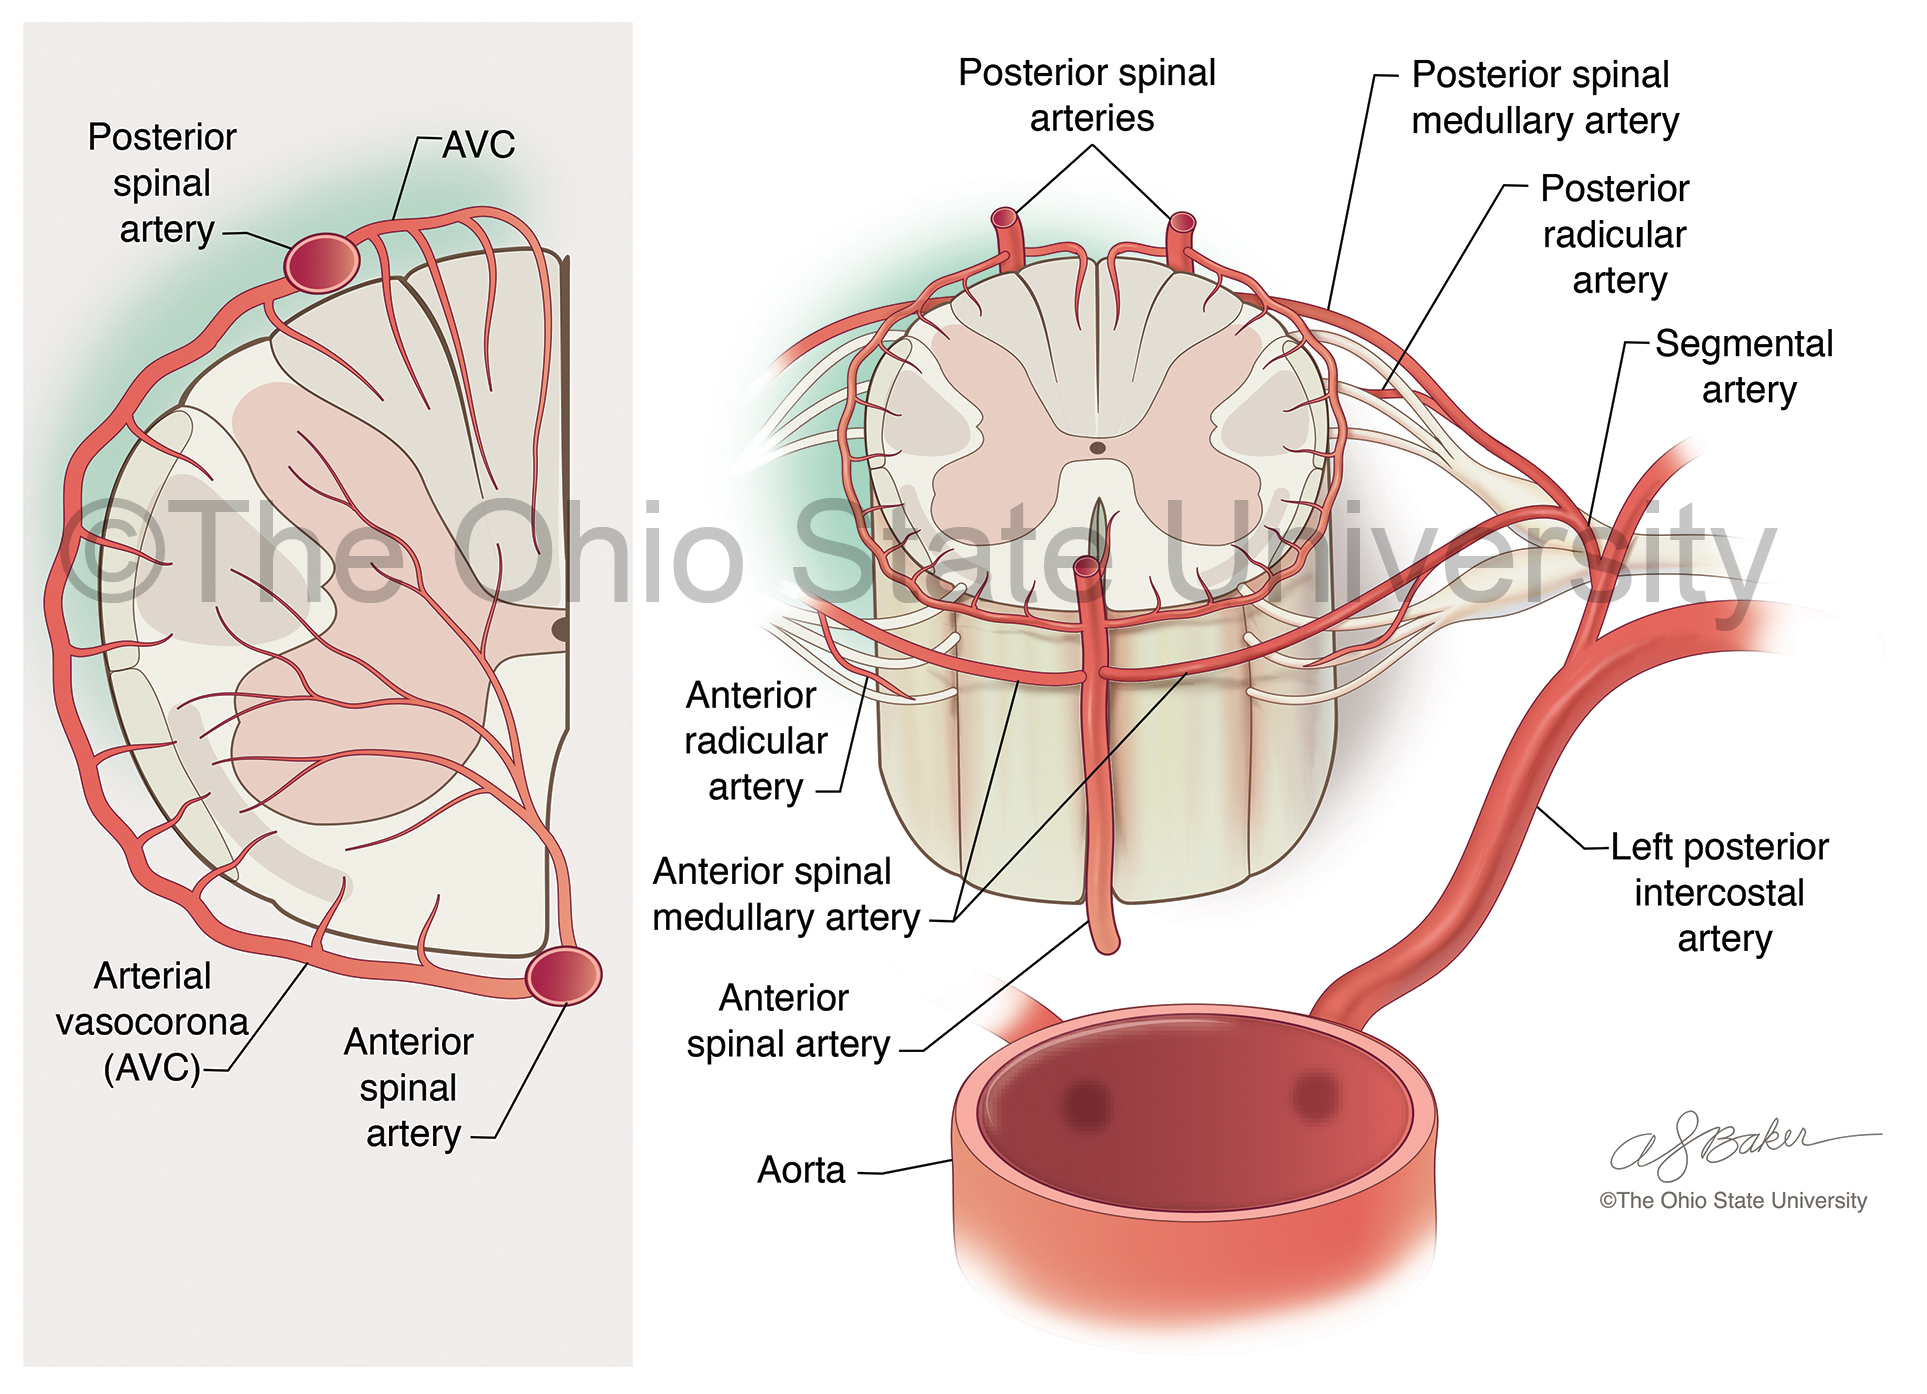 Moderate color anatomical illustration, showing blood supply to the spinal cord